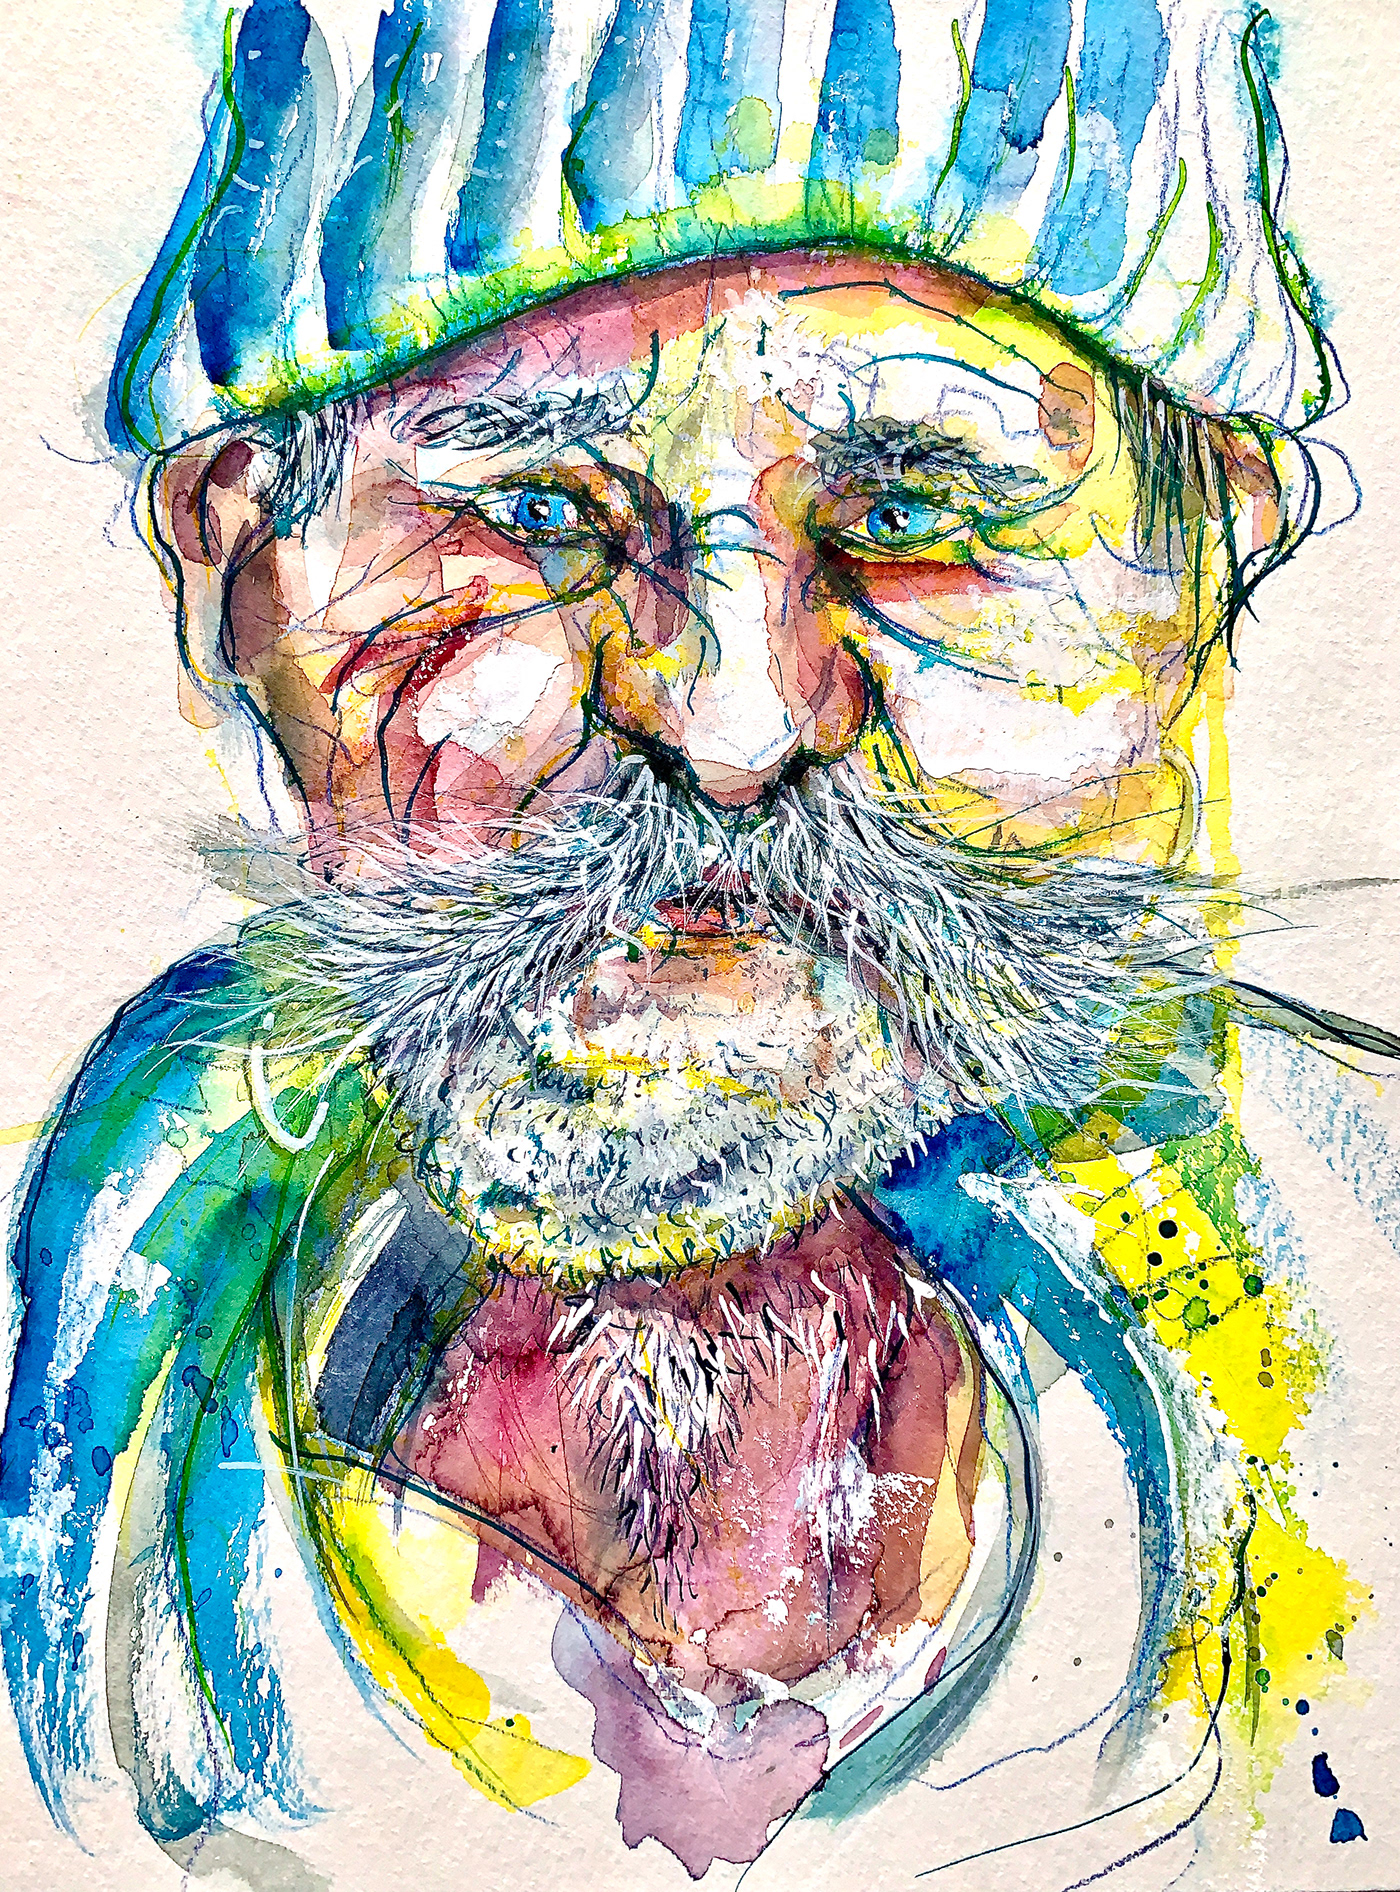 Watercolor portrait of a man with woolen cap. Very roughly drawn.